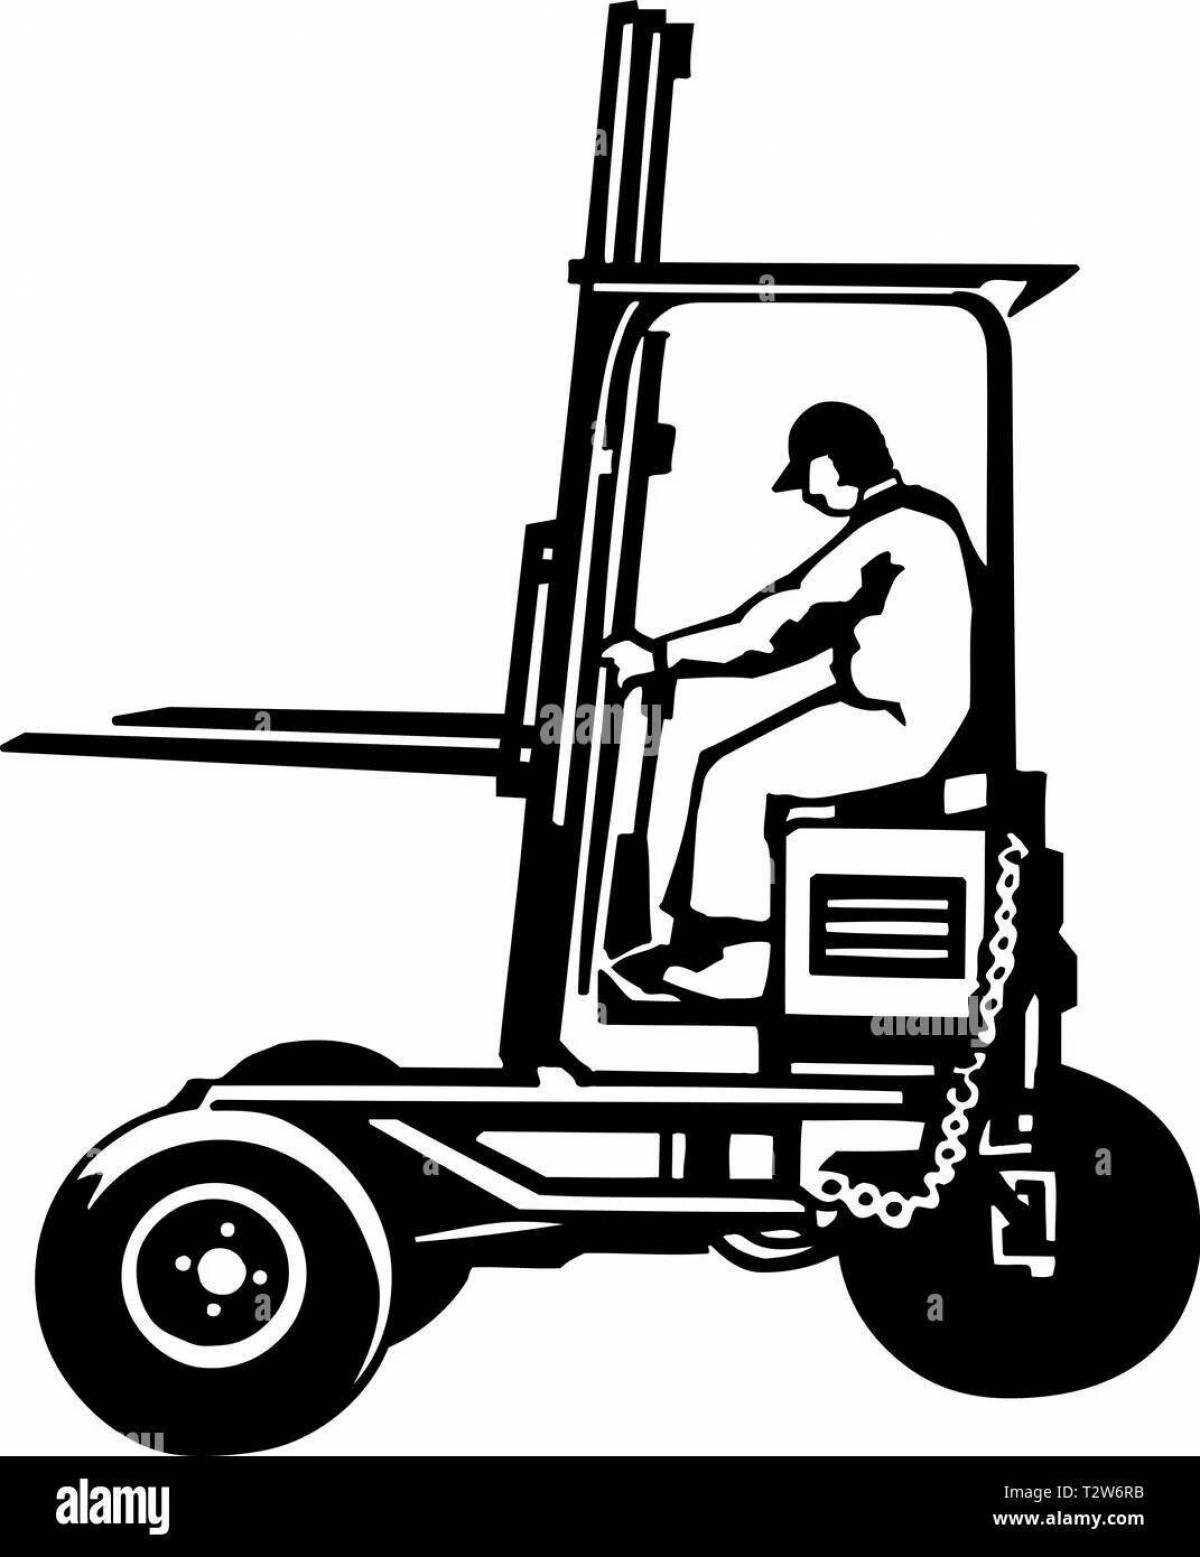 Charming loader coloring page